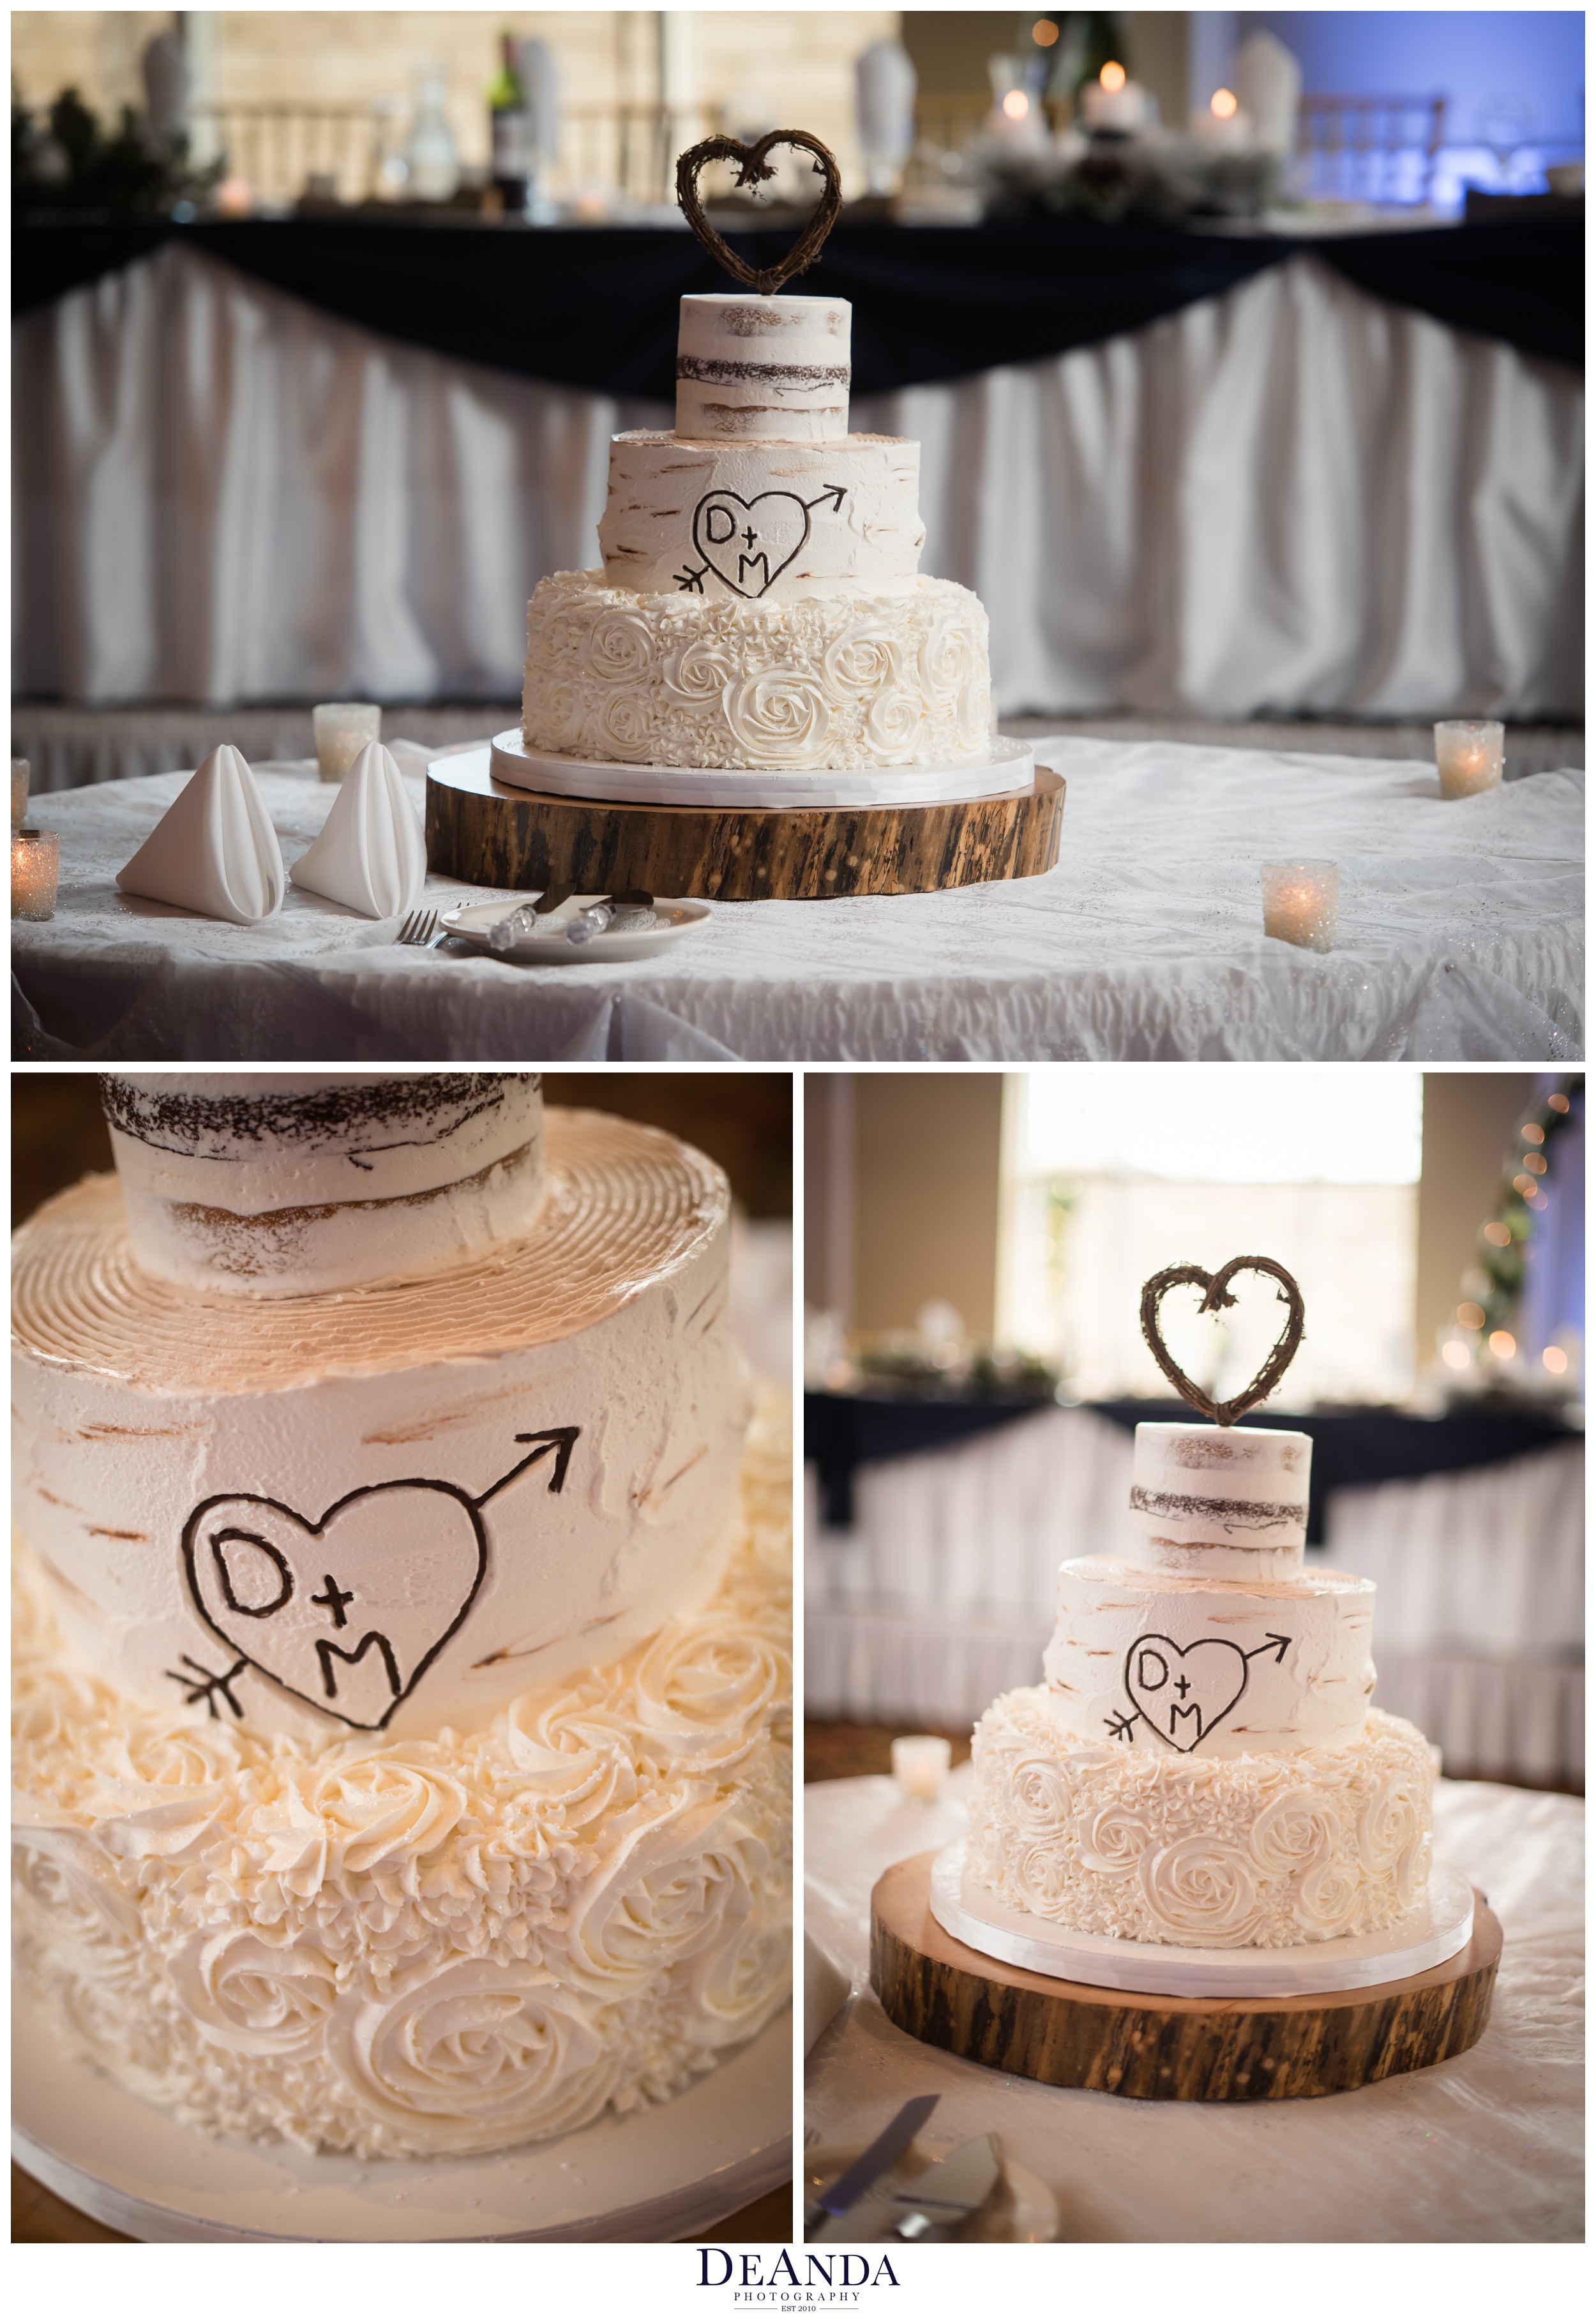 creative cakes wedding cake with rustic touches